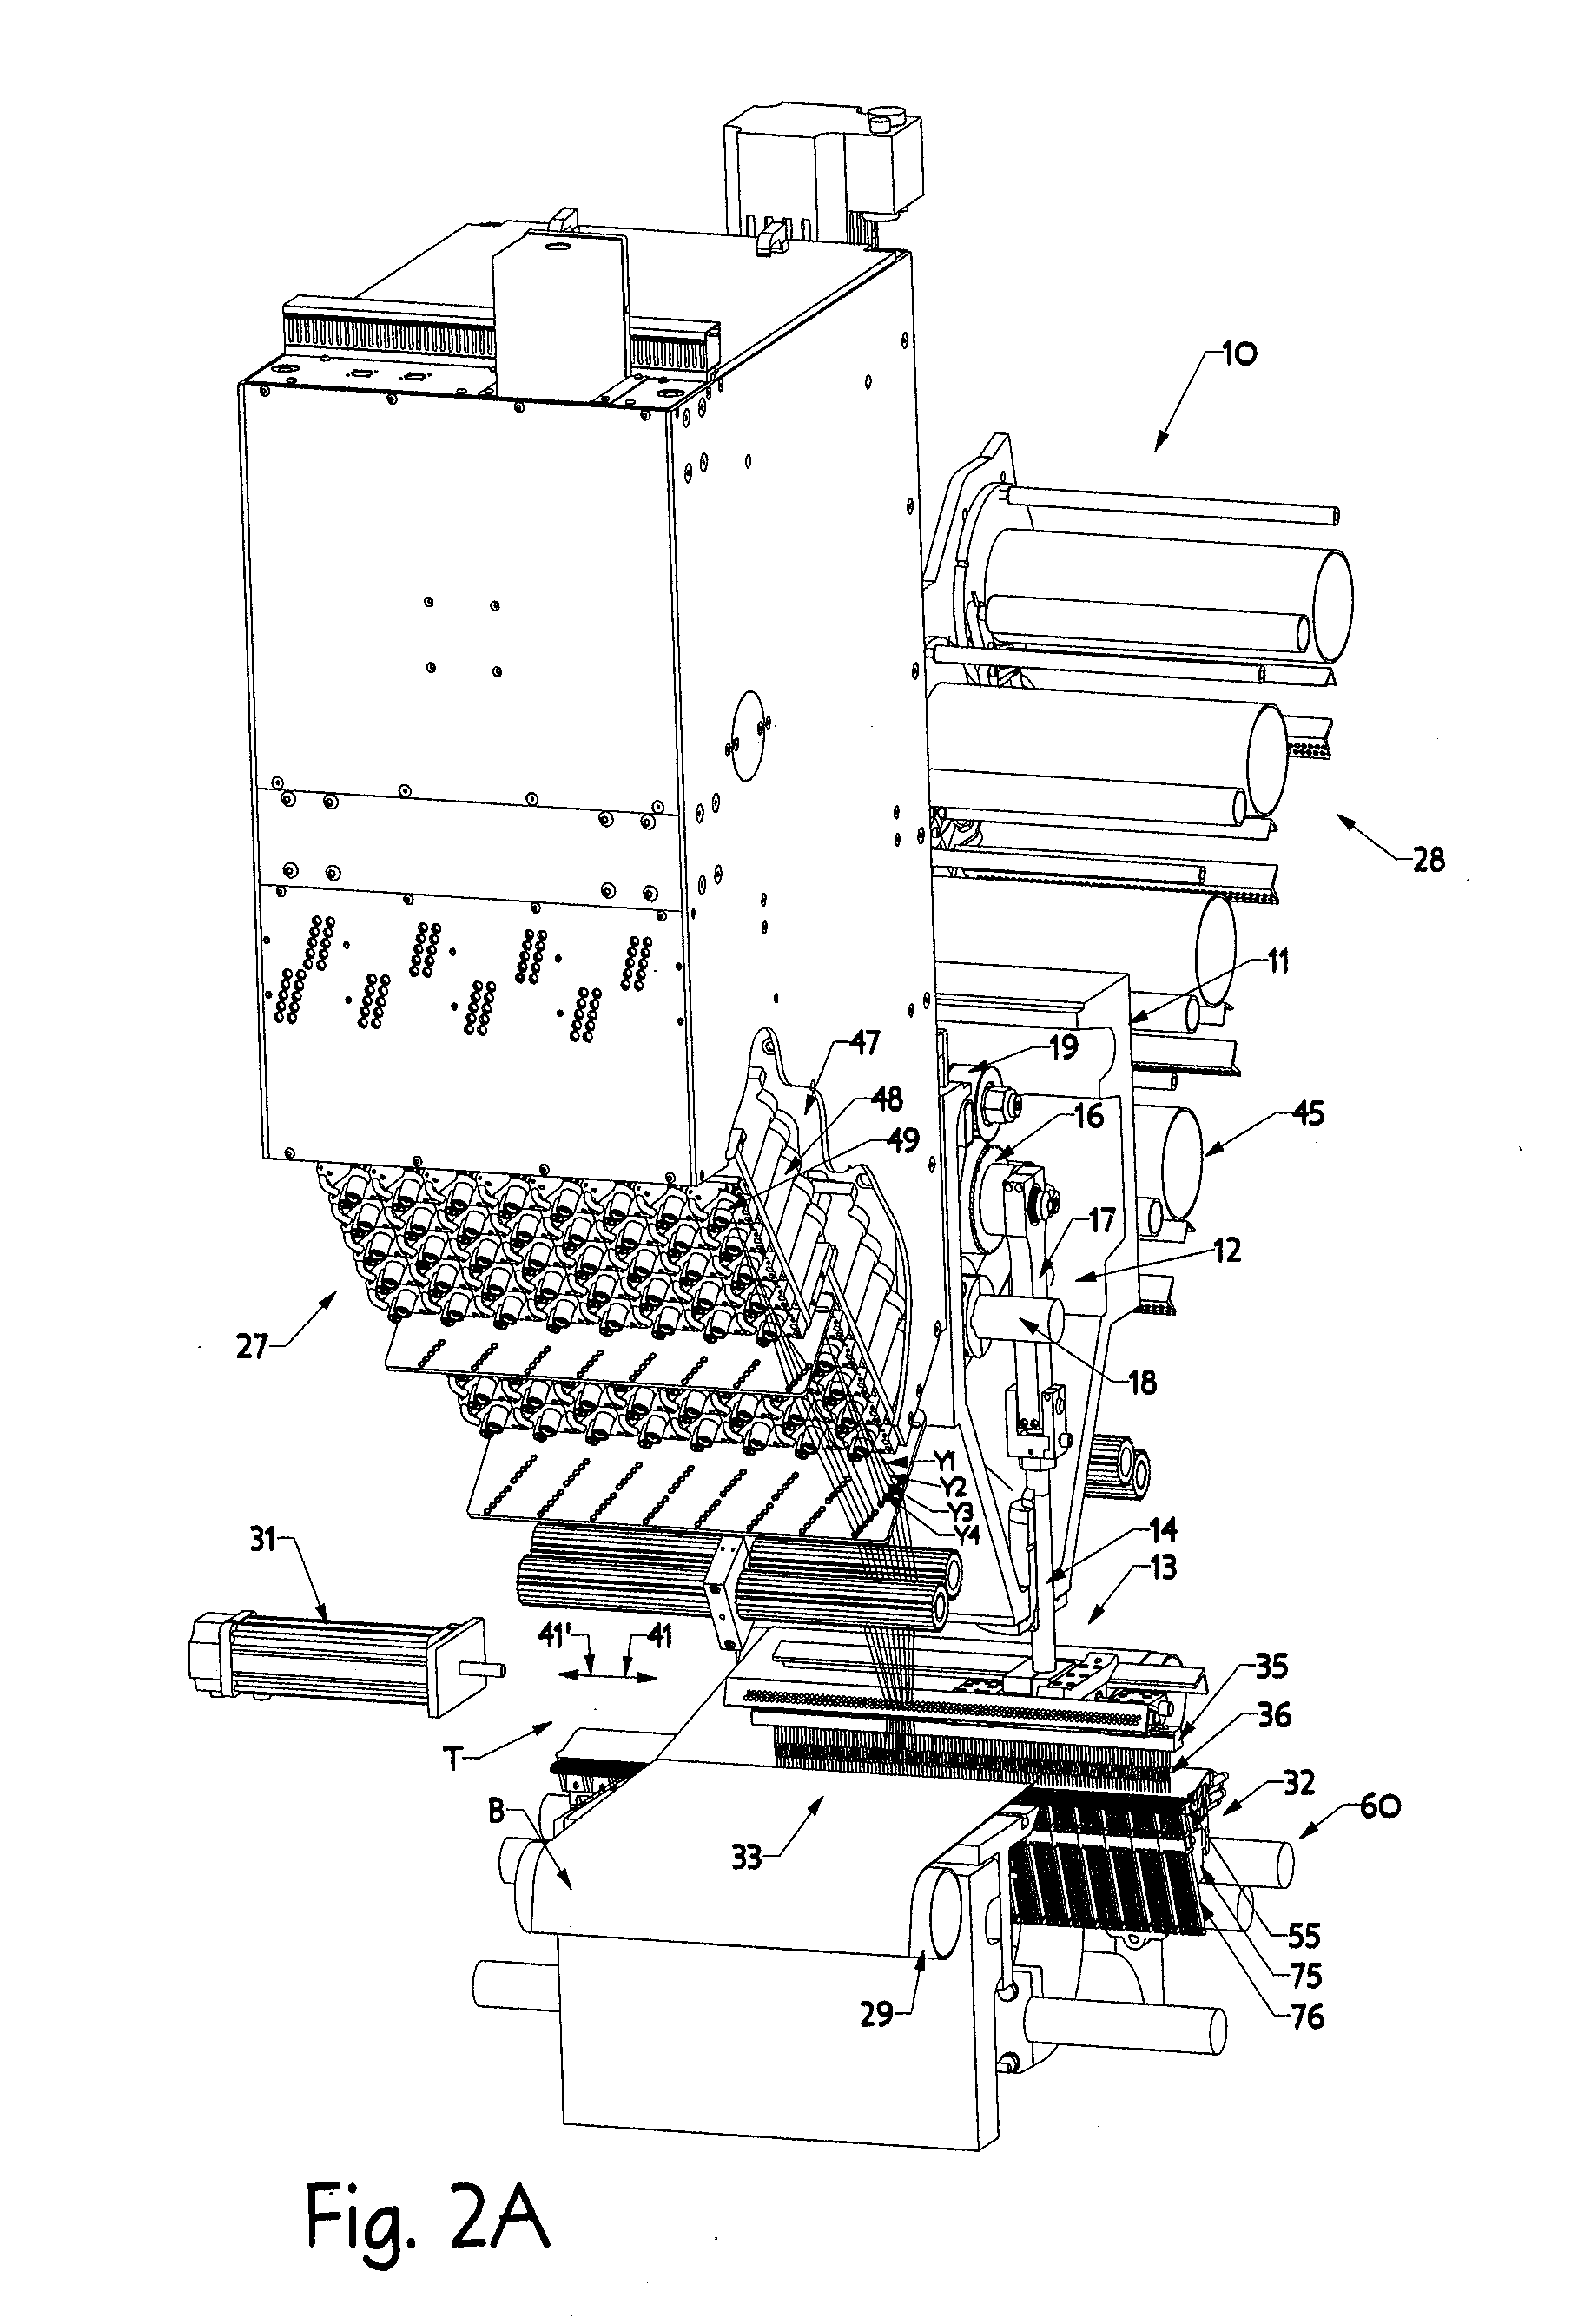 Stitch distribution control system for tufting machines